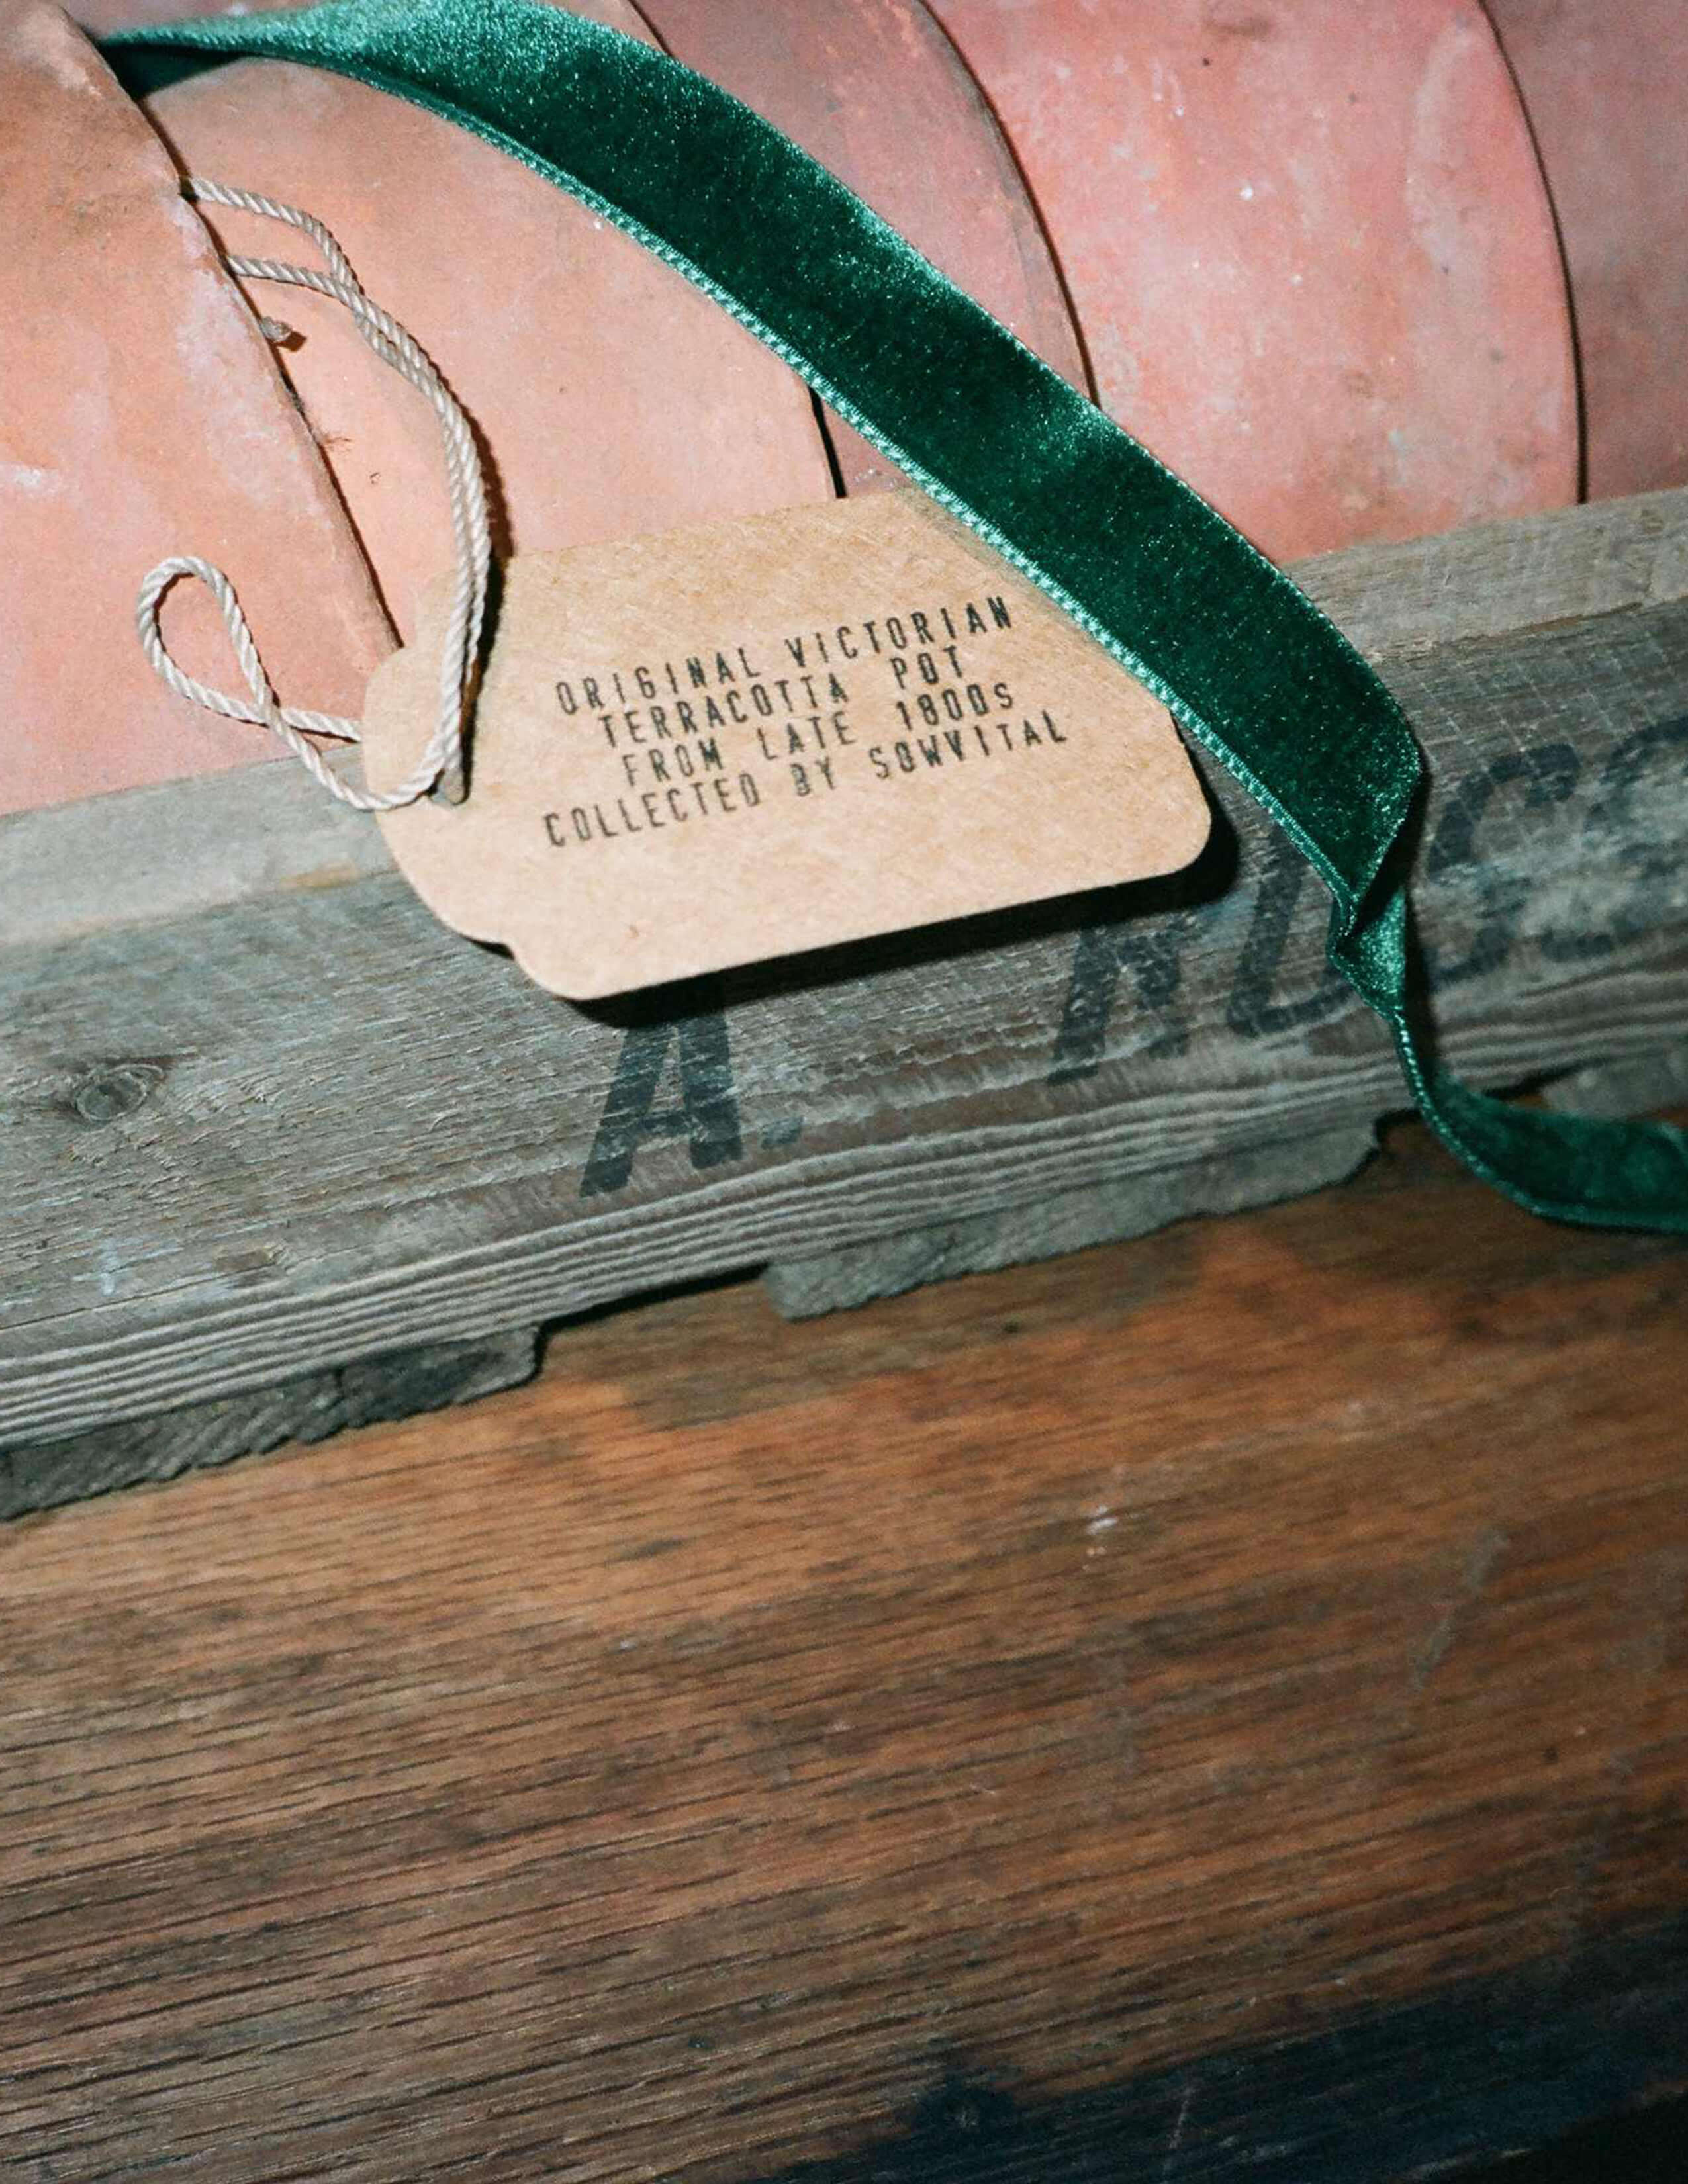 Sowvital collection of Victorian terracotta pots stocked up in a wooden crate with a green ribbon and a tag card.